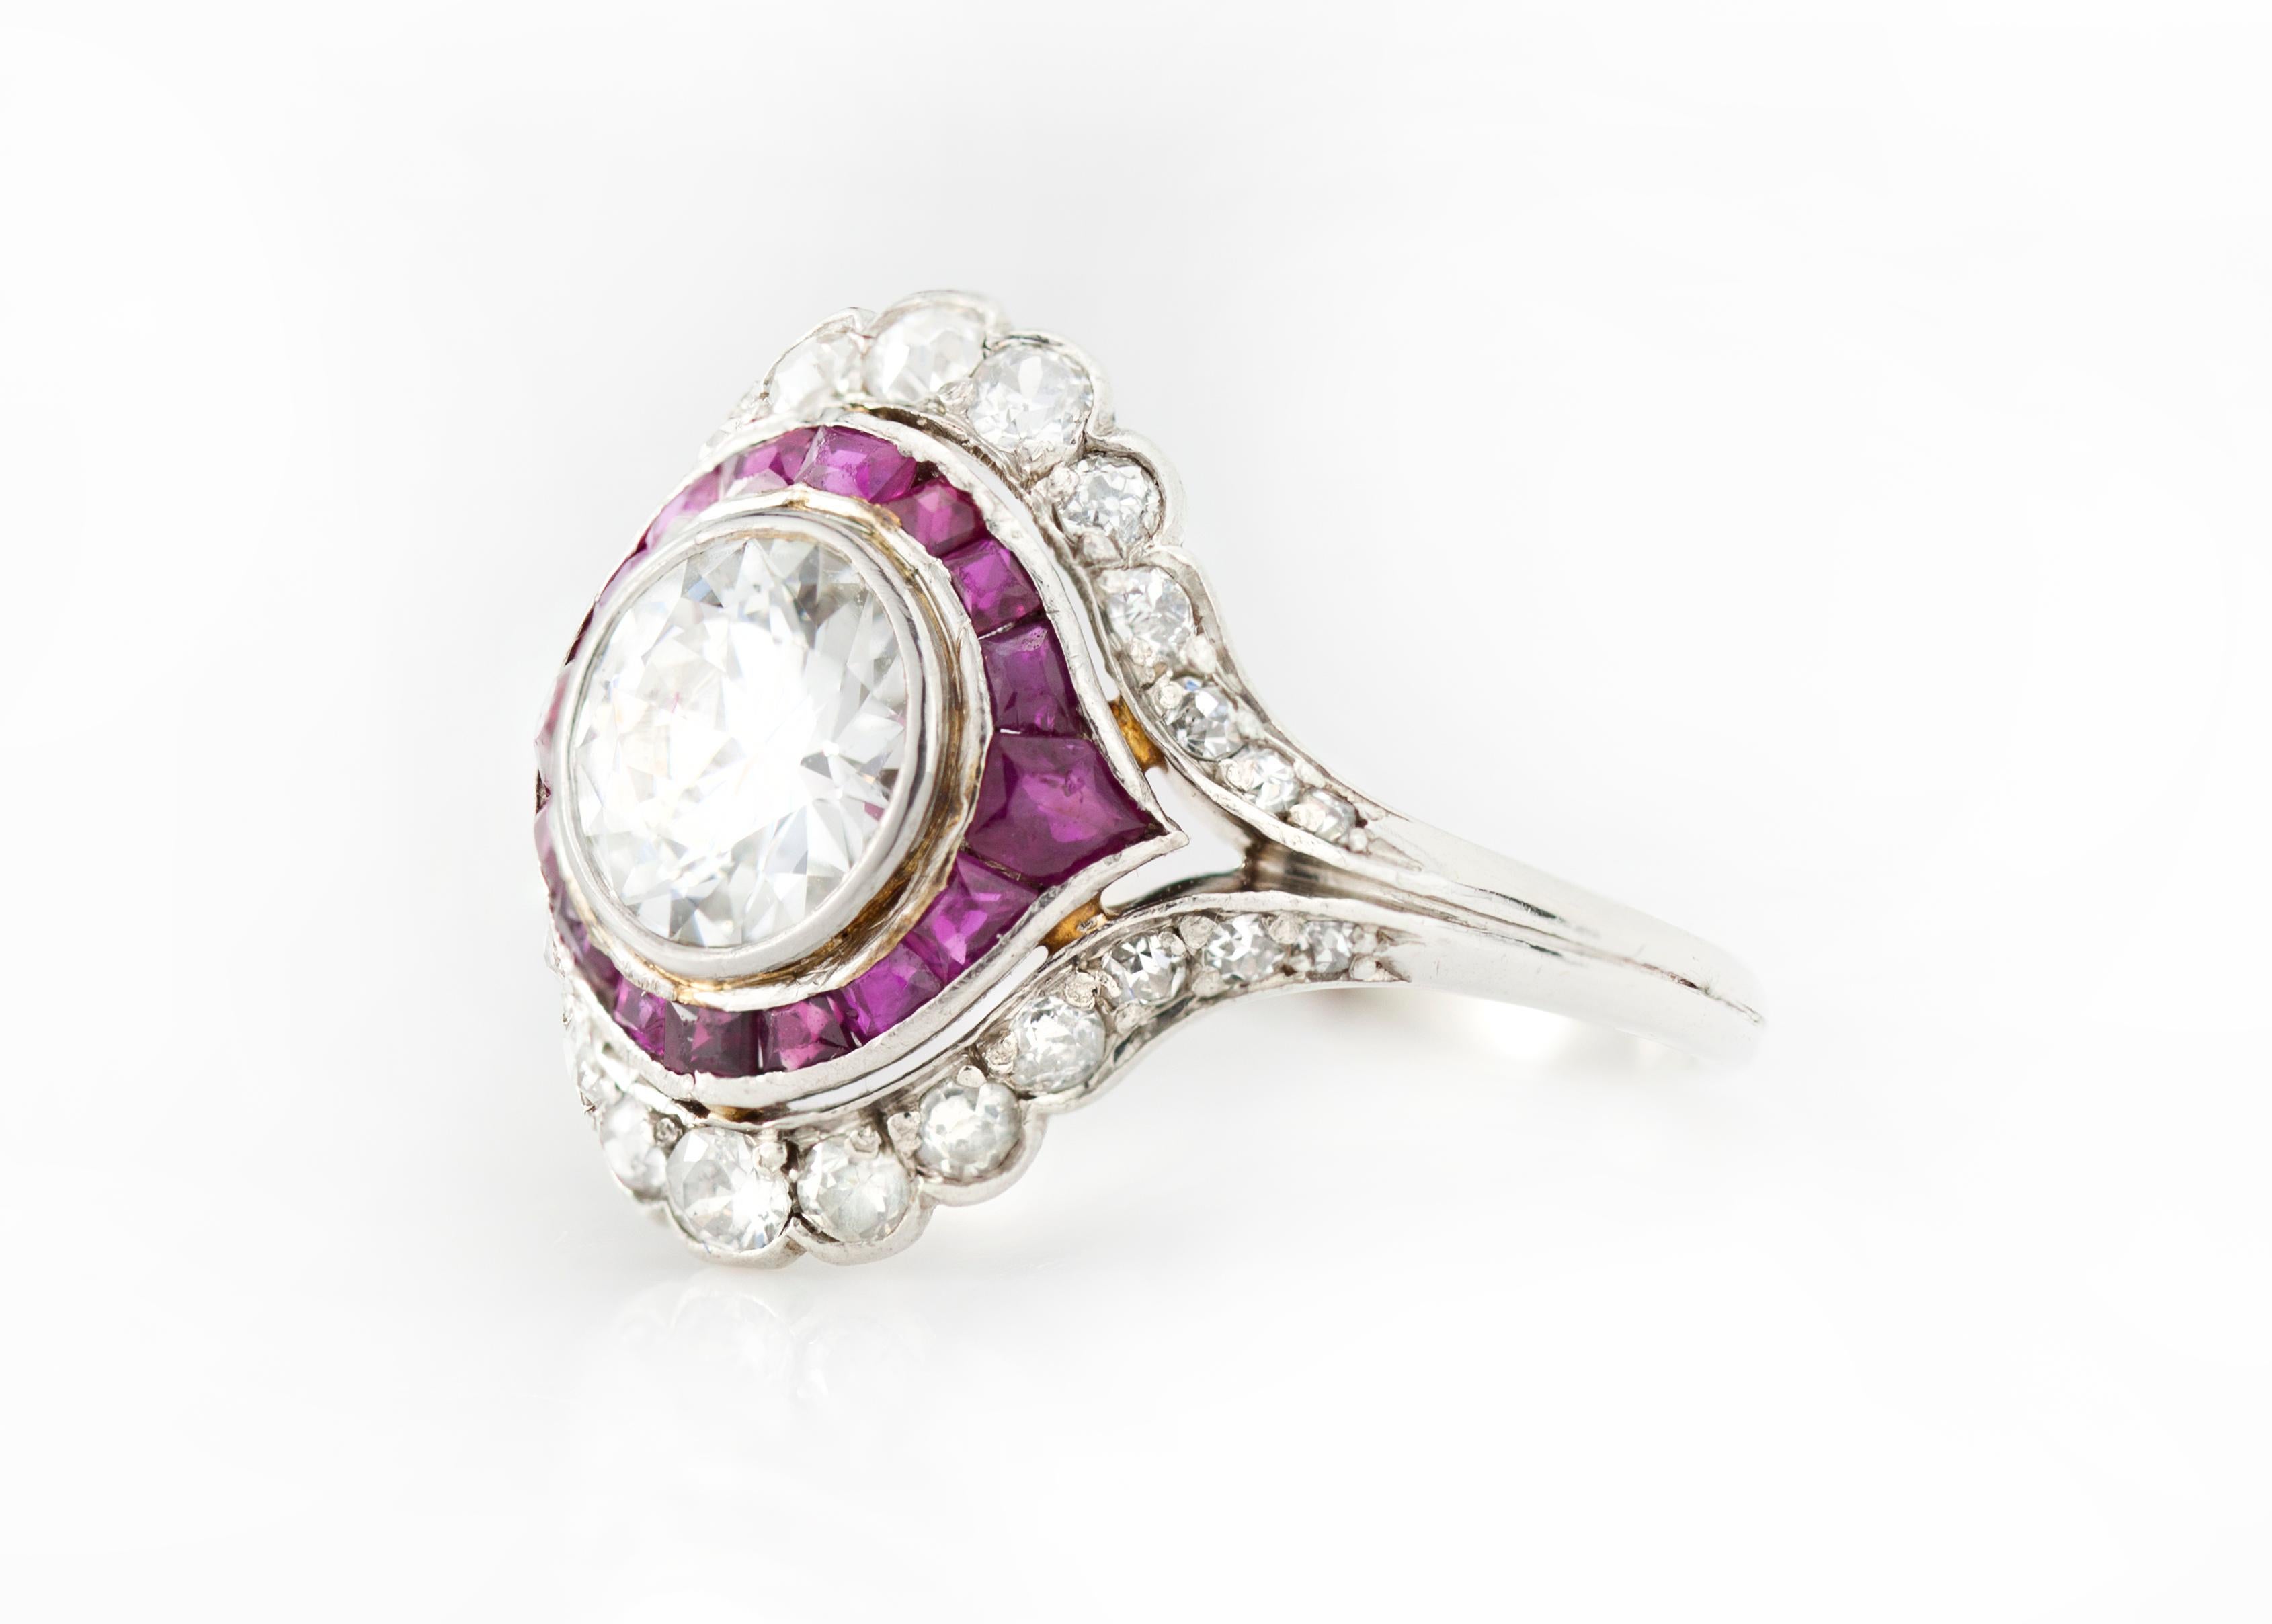 Art Deco platinum ladies ring with 1.50 ct diamond and rubies
Circa 1930's
Tested positive for platinum

Dimensions - 
Weight : 4.5 grams
Finger Size (UK) = O (US) = 7 1/2 (EU) = 55 1/4
Size : 2.2 x 2 x 1.8 cm

Diamonds - 
Cut: Round
Number of